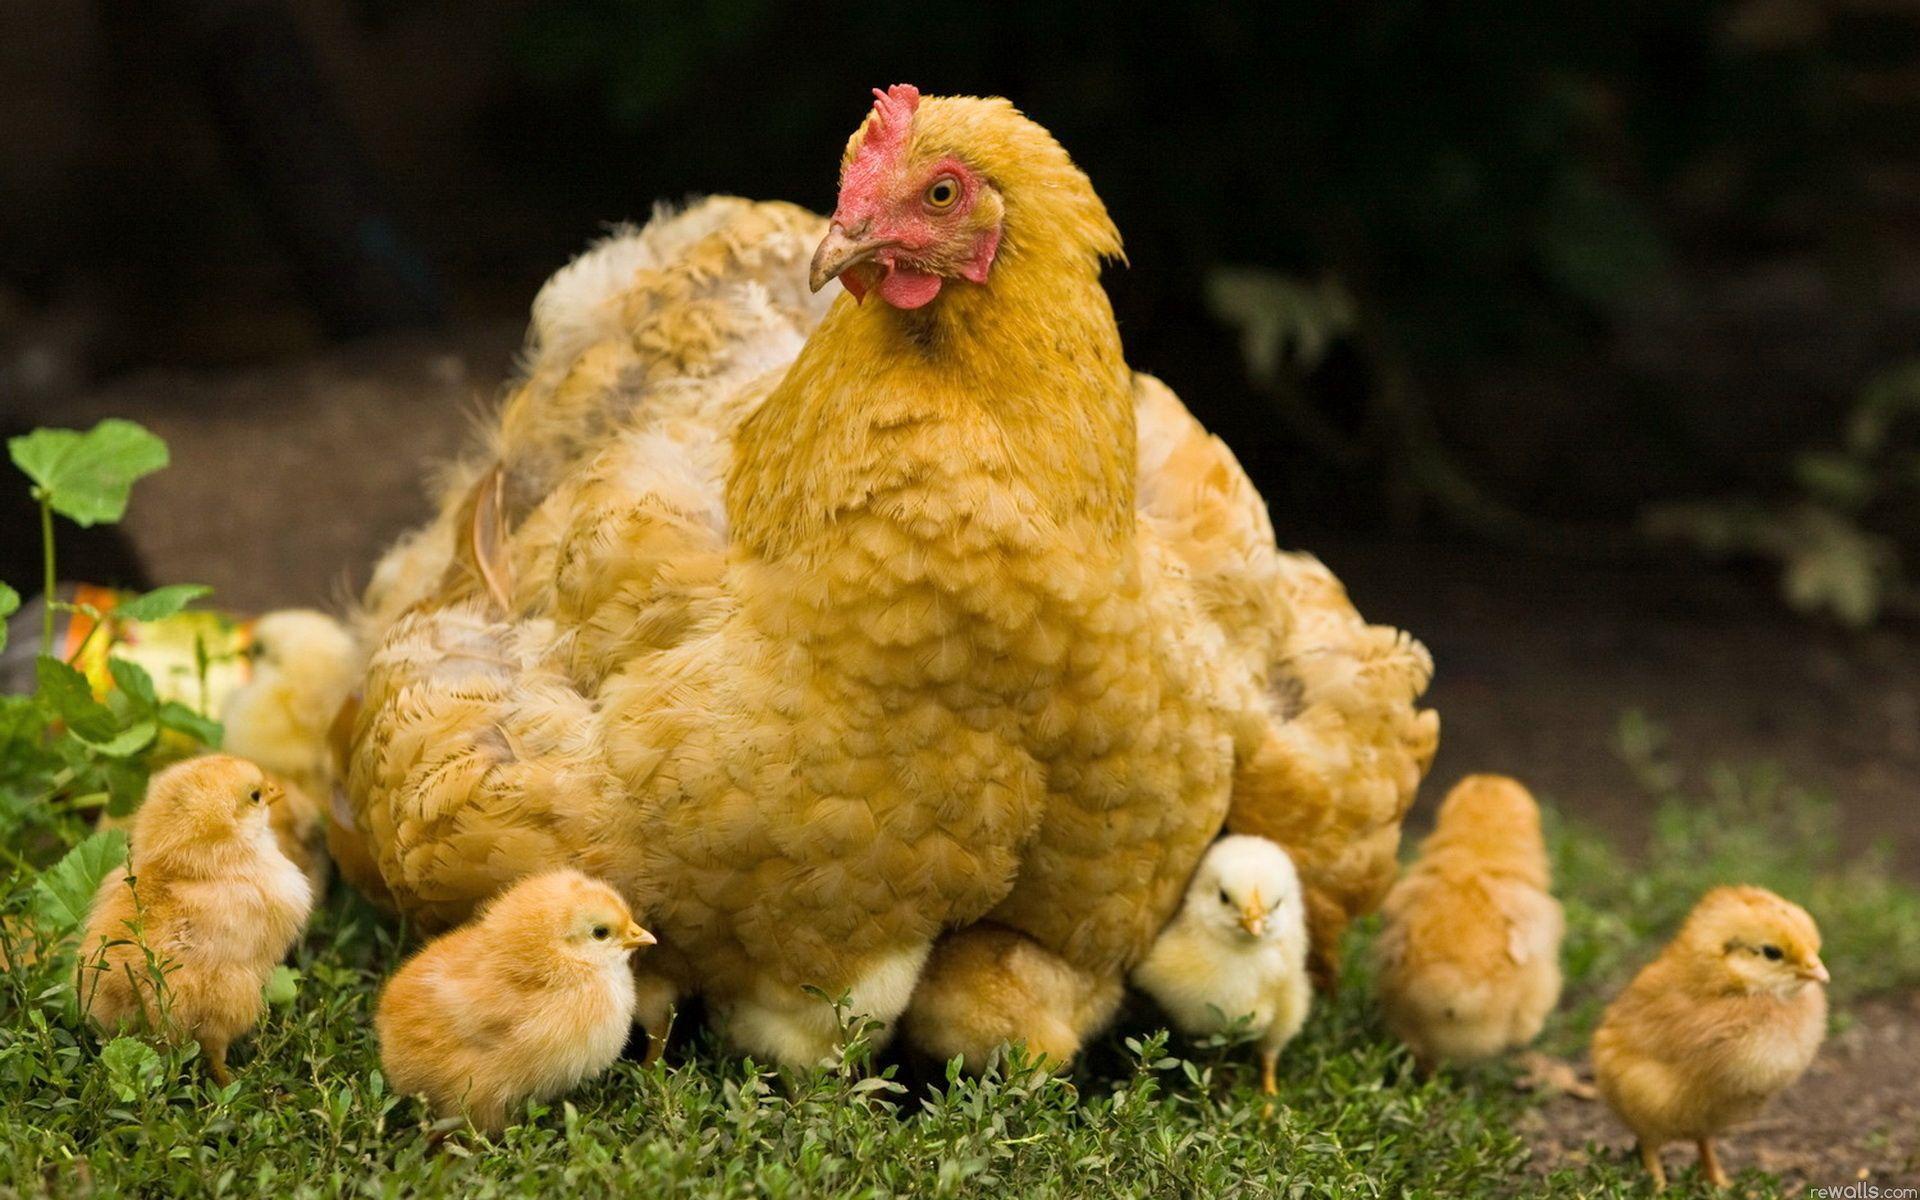 Chickens Wallpaper, Image, Wallpaper of Chickens in Full HD